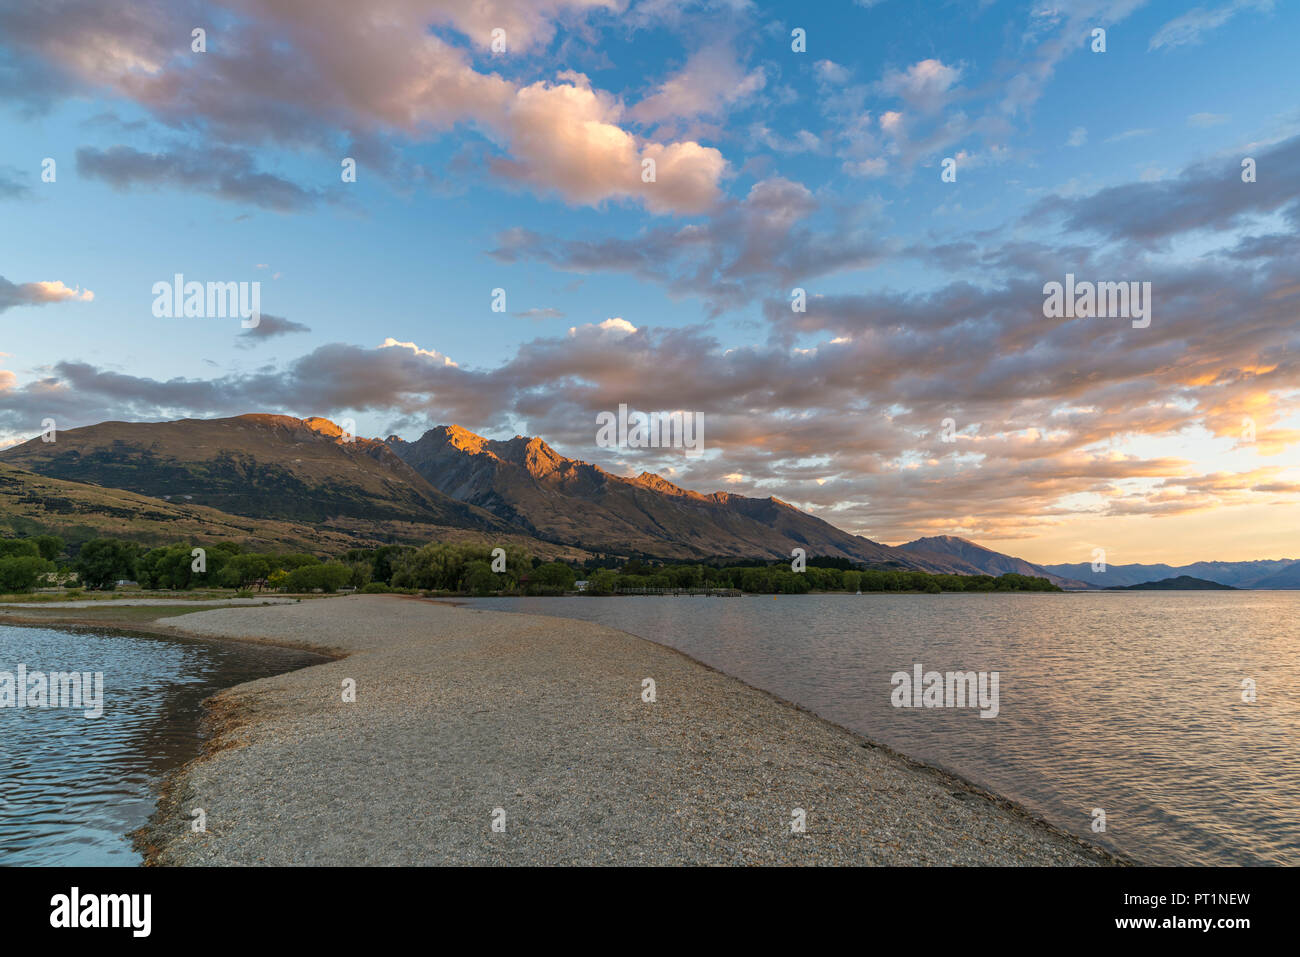 Clouds in the sky above Lake Wakatipu and mountains at sunset, Glenorchy, Queenstown Lakes district, Otago region, South Island, New Zealand, Stock Photo